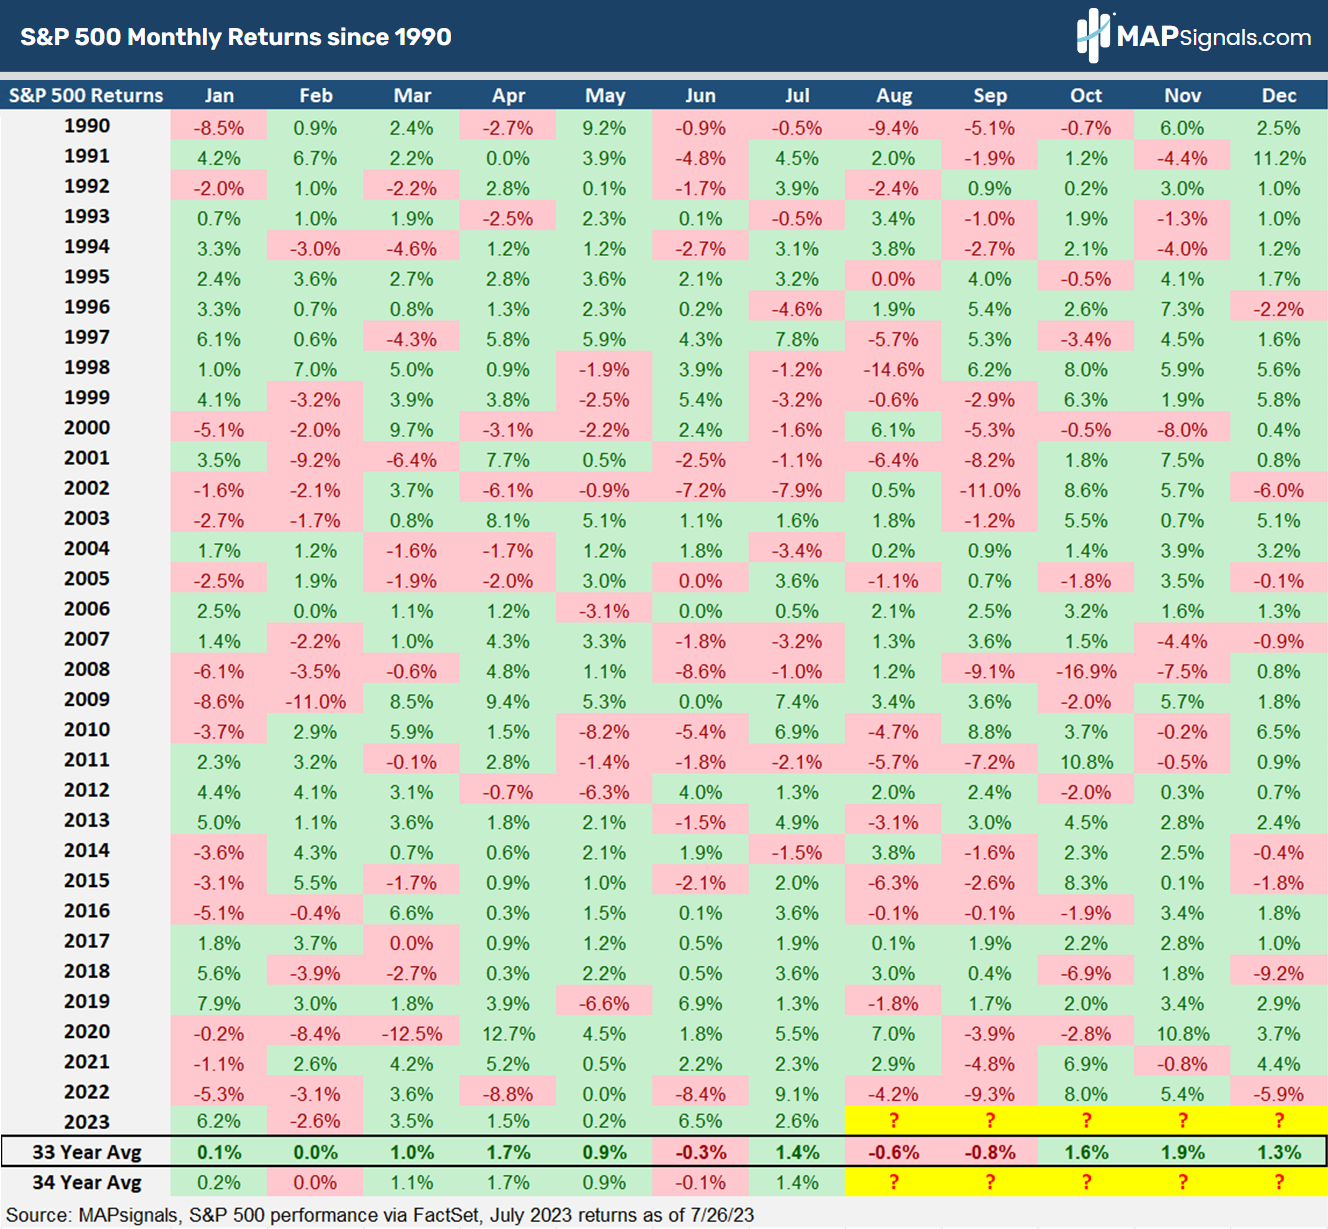 S&P 500 Monthly Returns since 1990 | MAPsignals